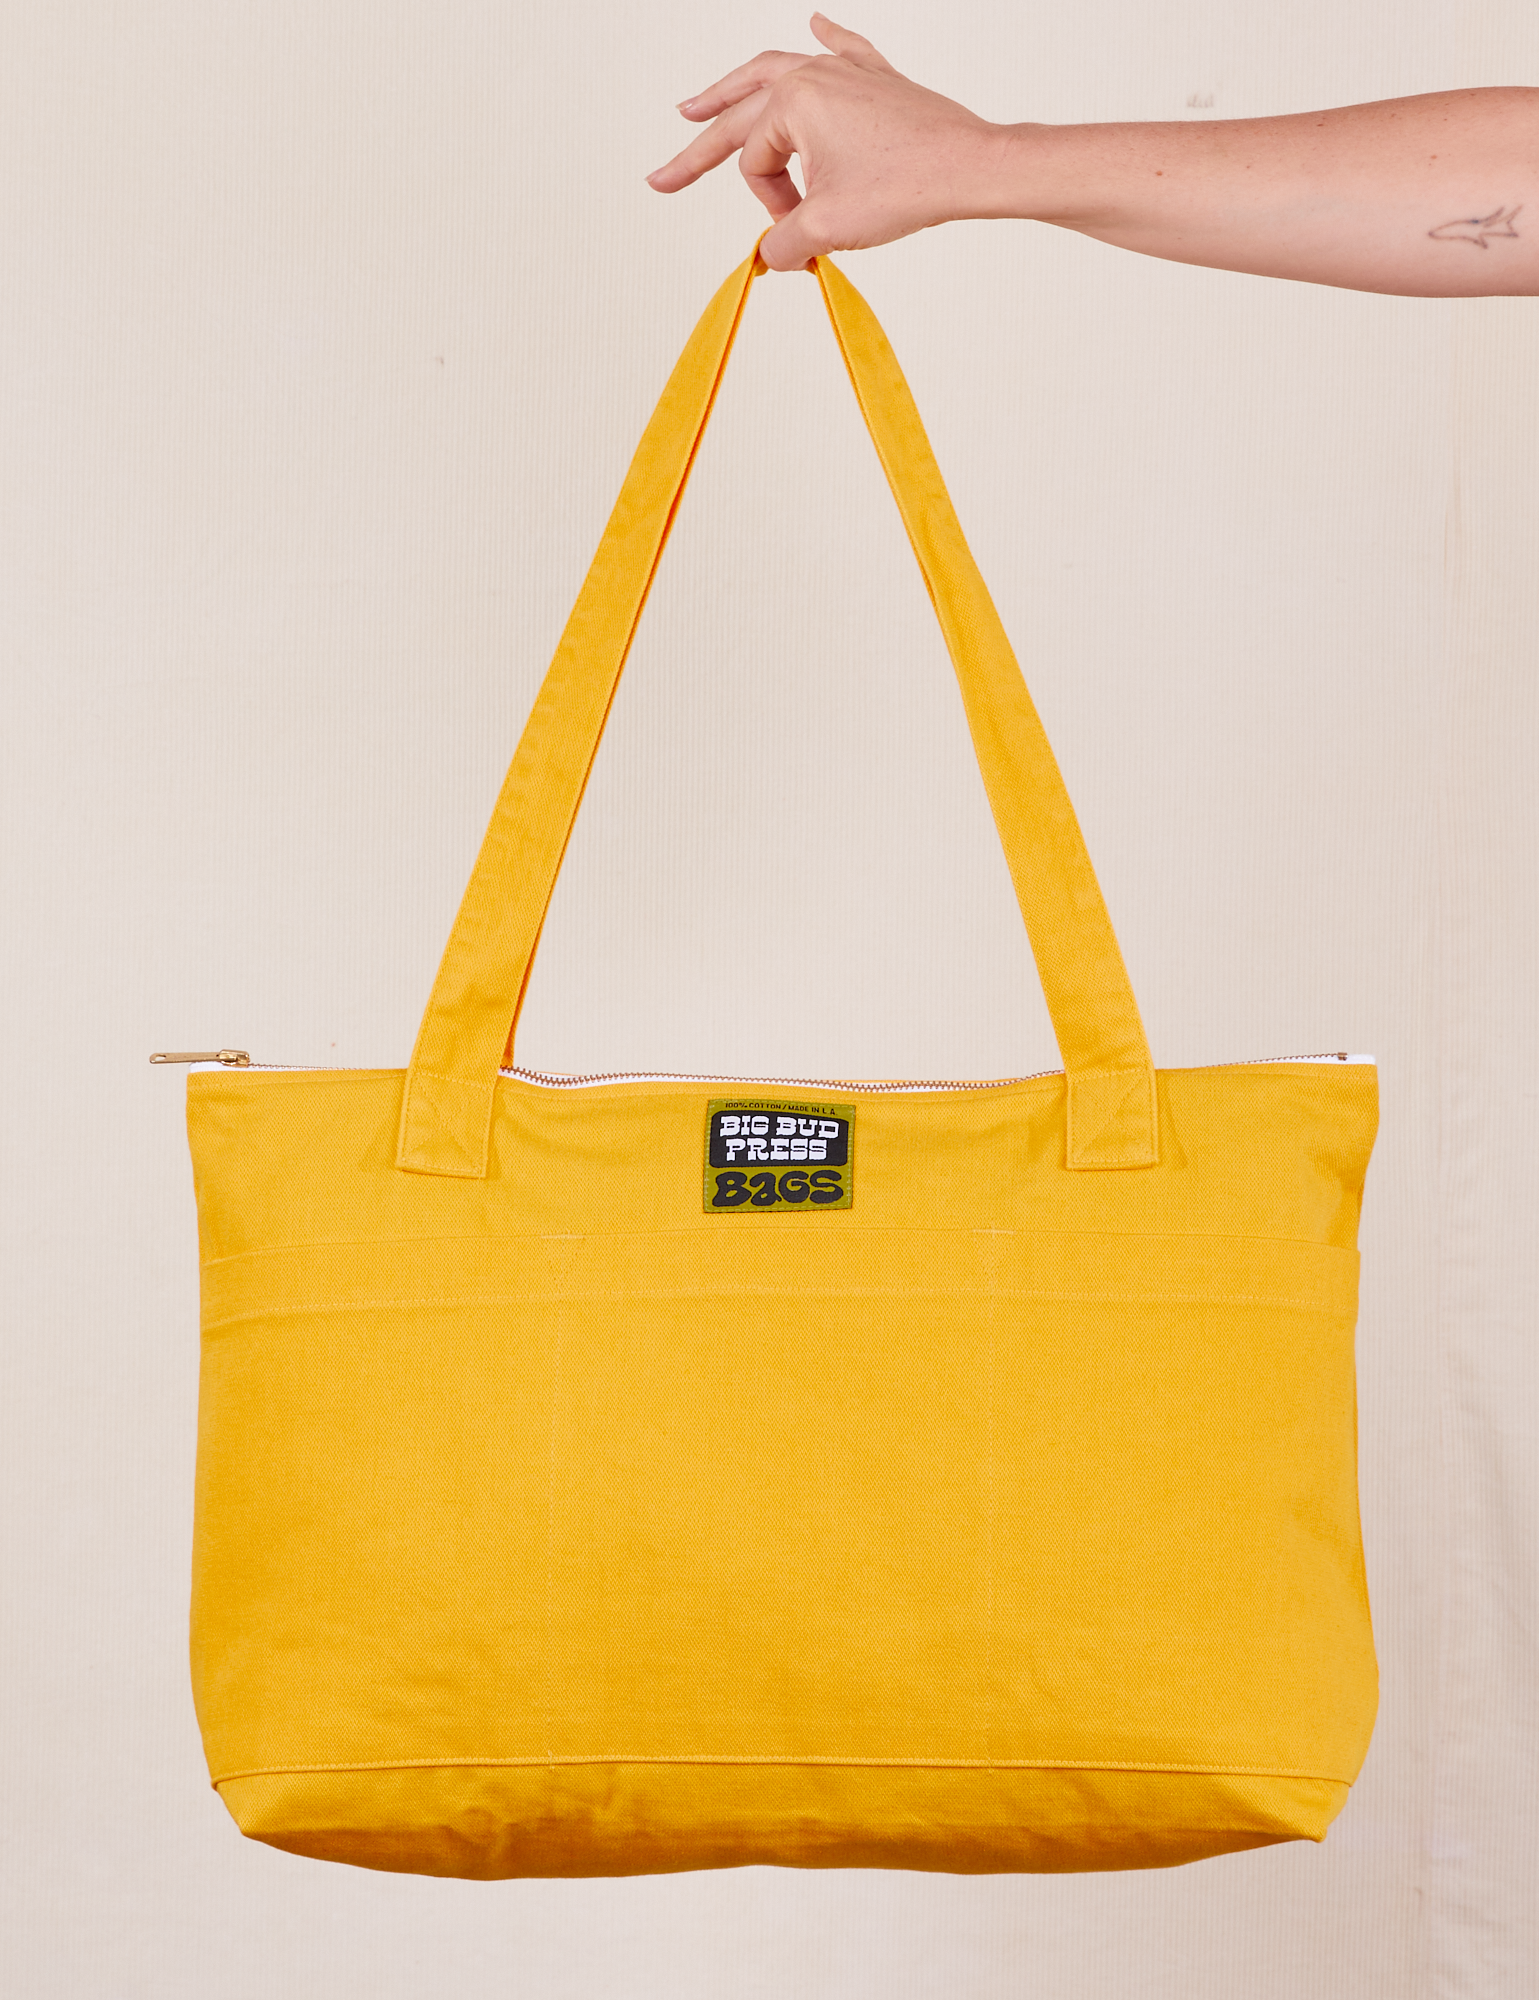 XL Zip Tote in Sunshine Yellow held by model